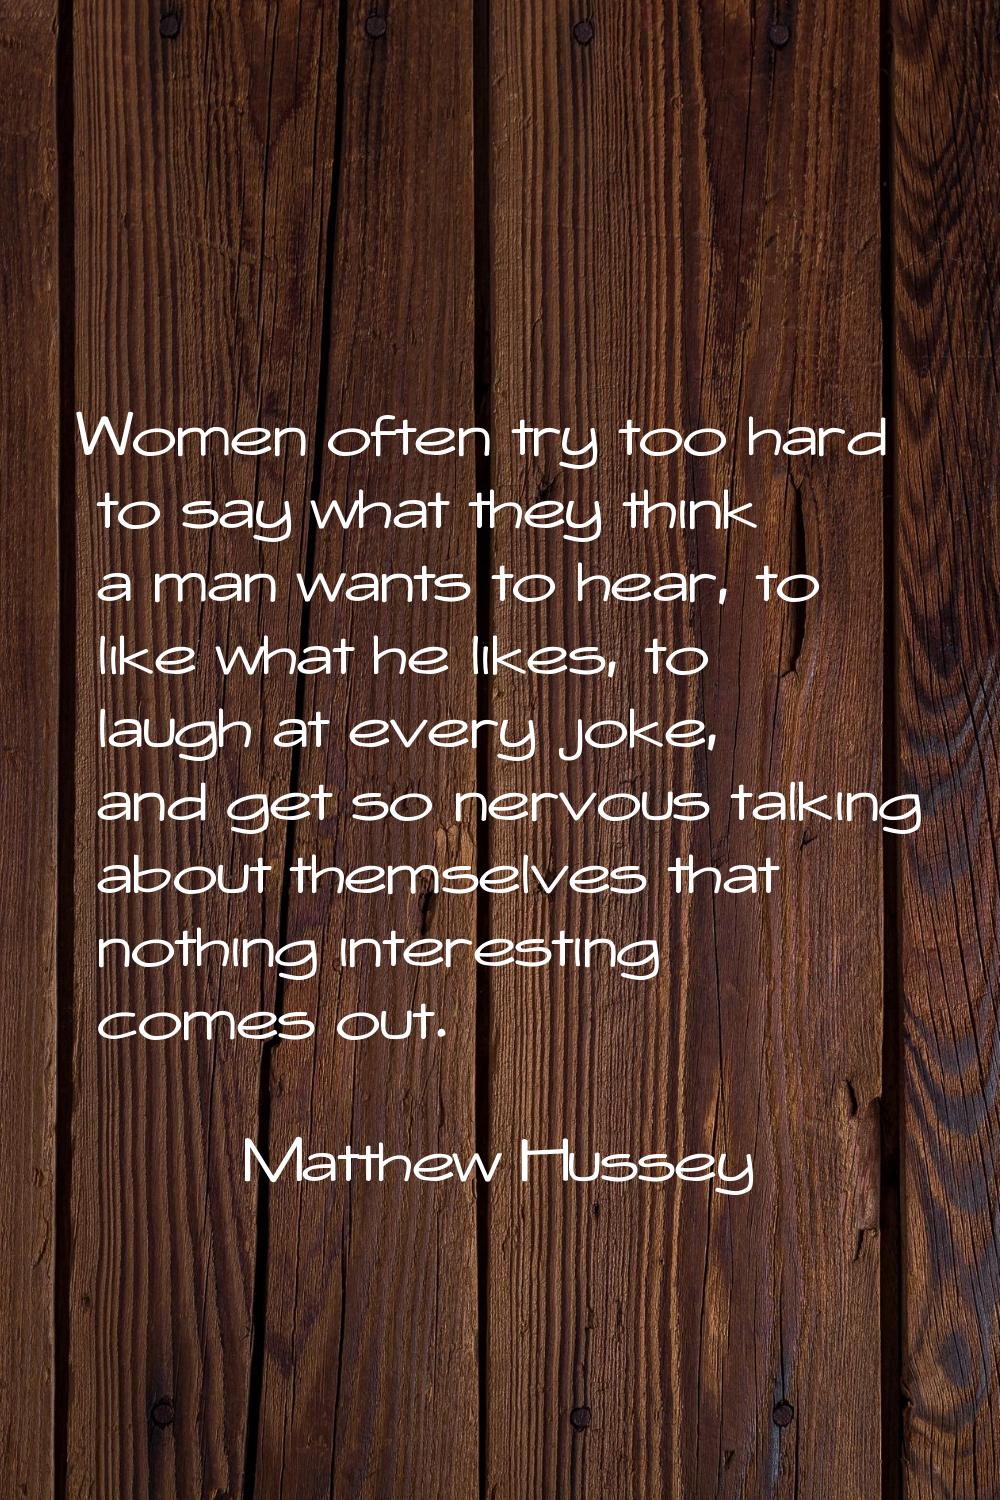 Women often try too hard to say what they think a man wants to hear, to like what he likes, to laug